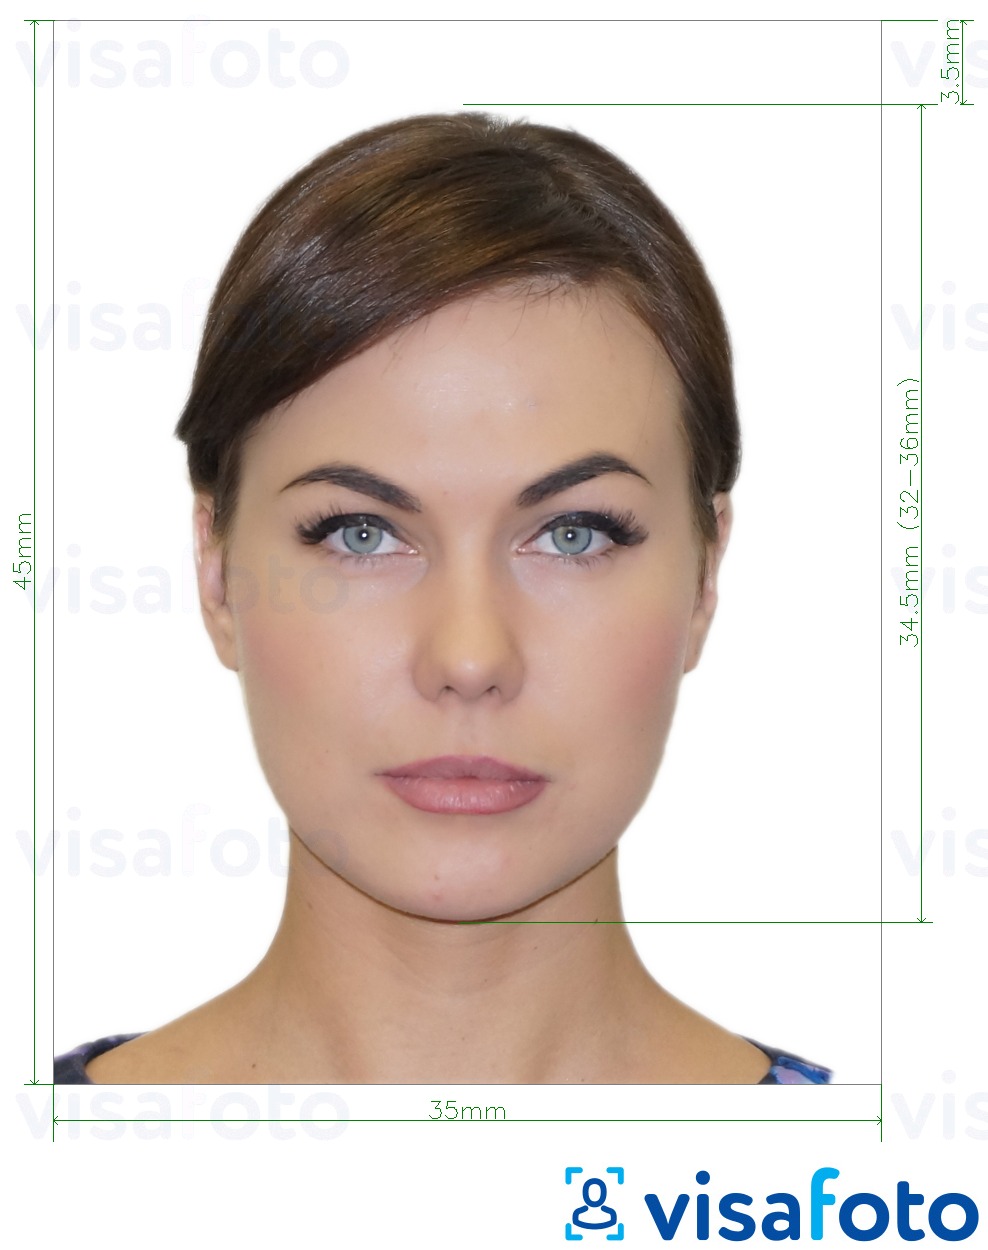 Example of photo for Ukraine International Passport (Child Information) with exact size specification